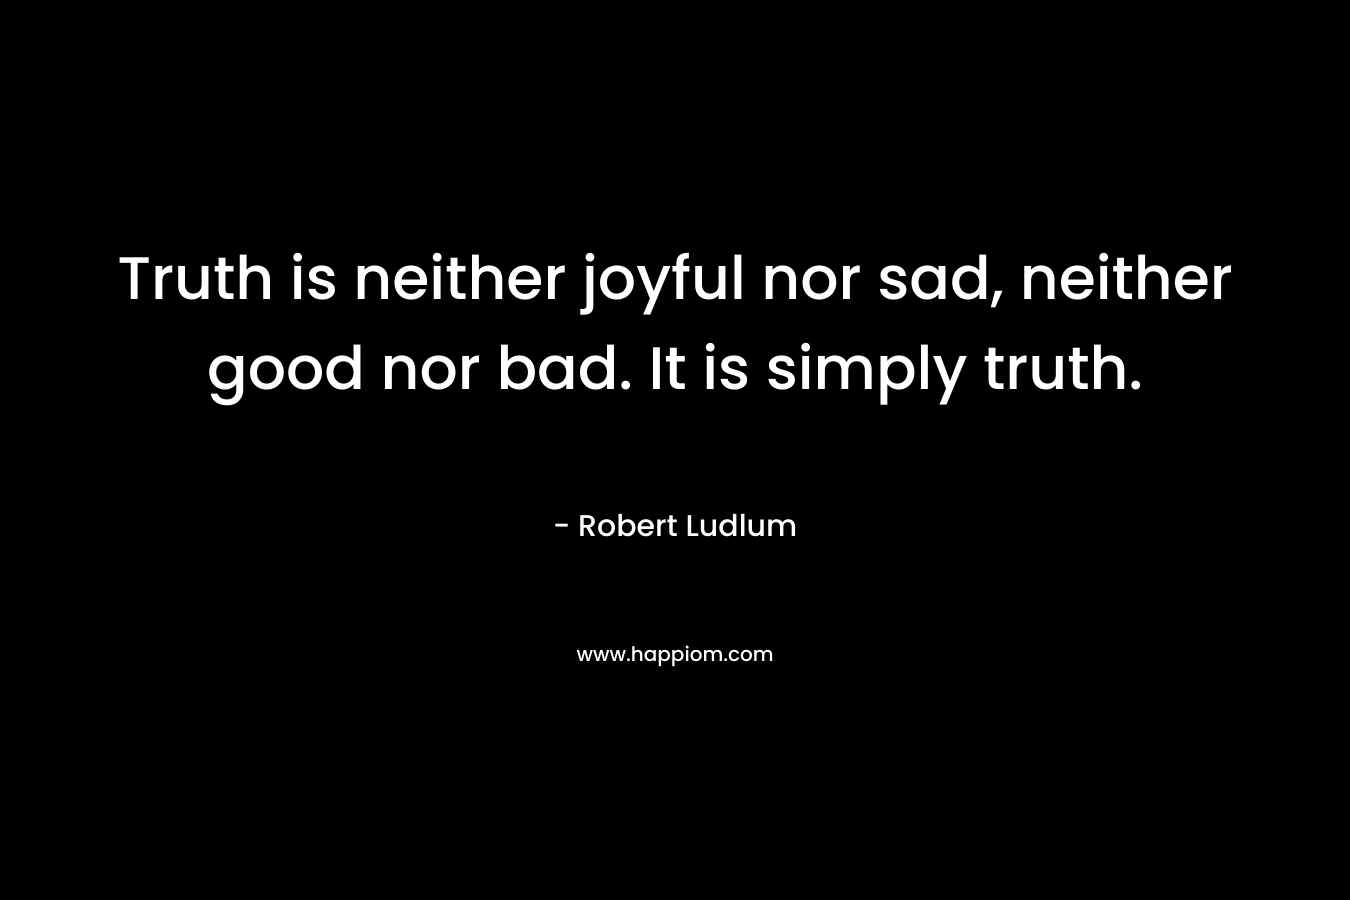 Truth is neither joyful nor sad, neither good nor bad. It is simply truth.